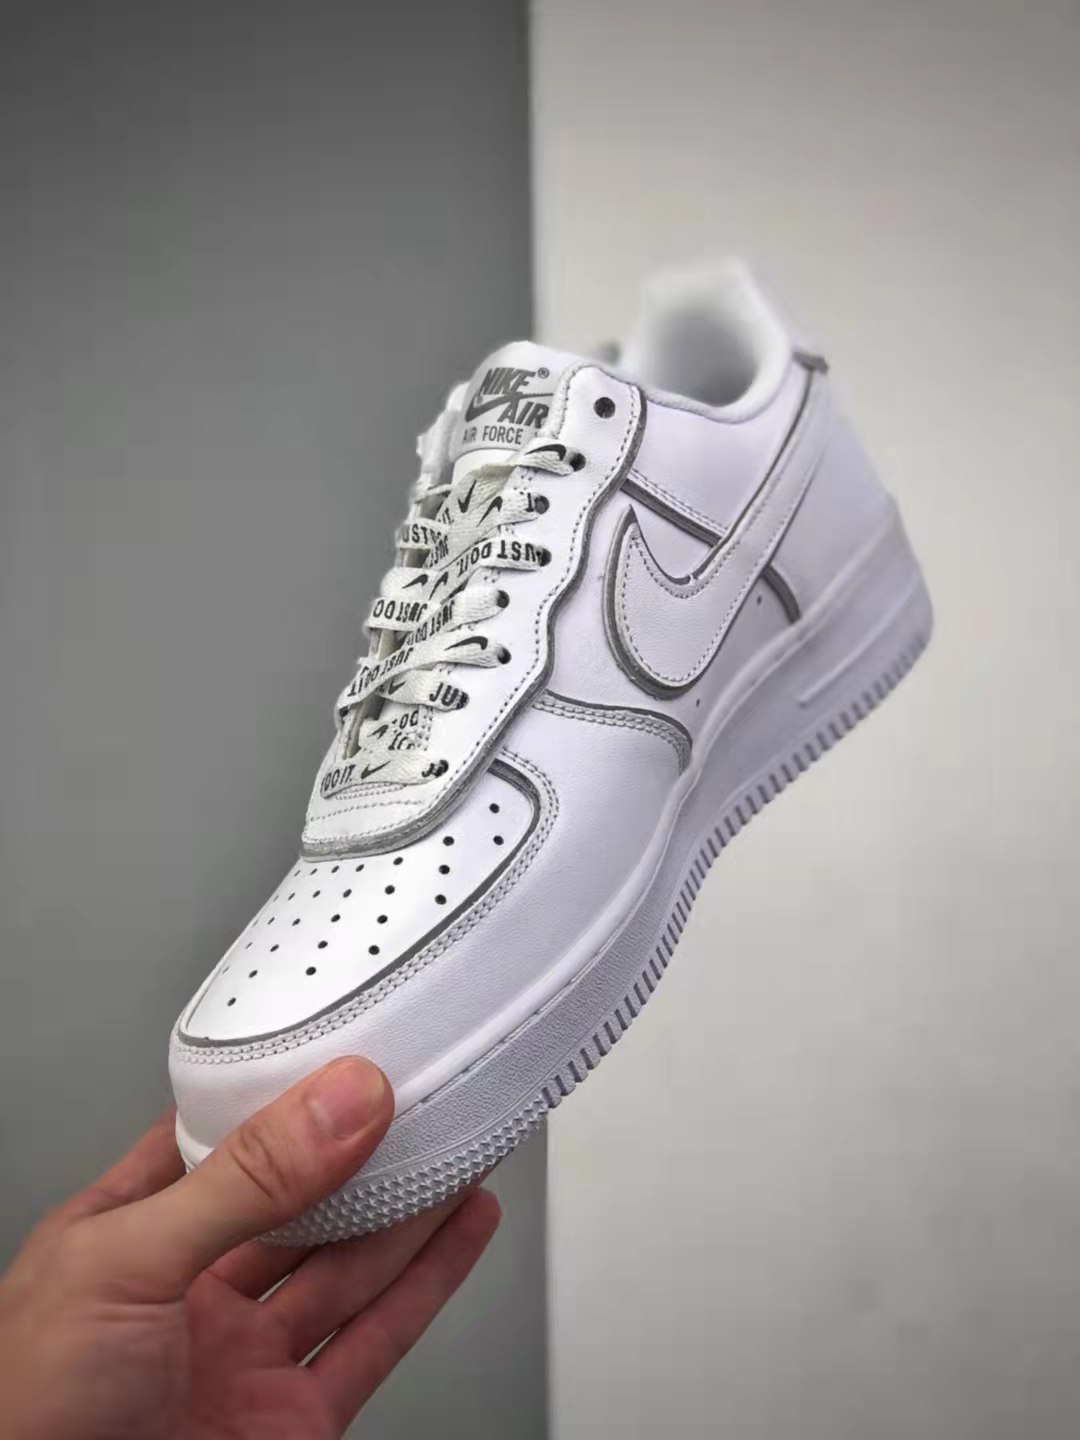 Nike Air Force 1 Low Stussy White Silver Reflective BQ6246-019 - Stylish and Reflective Sneakers for Unparalleled Style and Durability